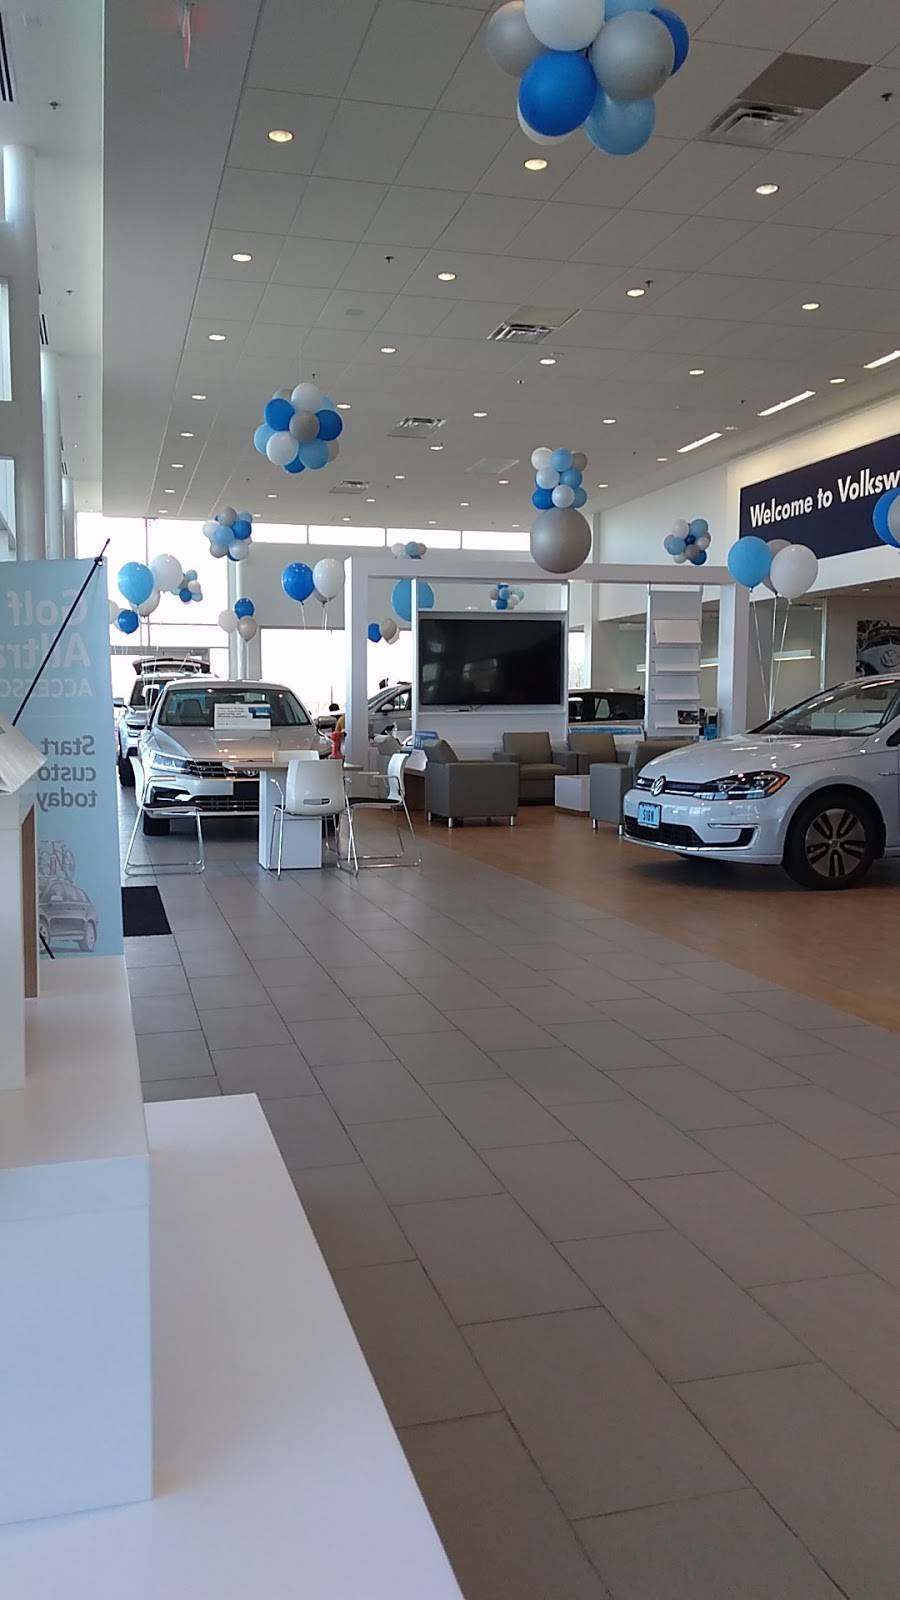 Pohanka Volkswagen | 1720 Ritchie Station Ct, Capitol Heights, MD 20743, USA | Phone: (301) 808-7100